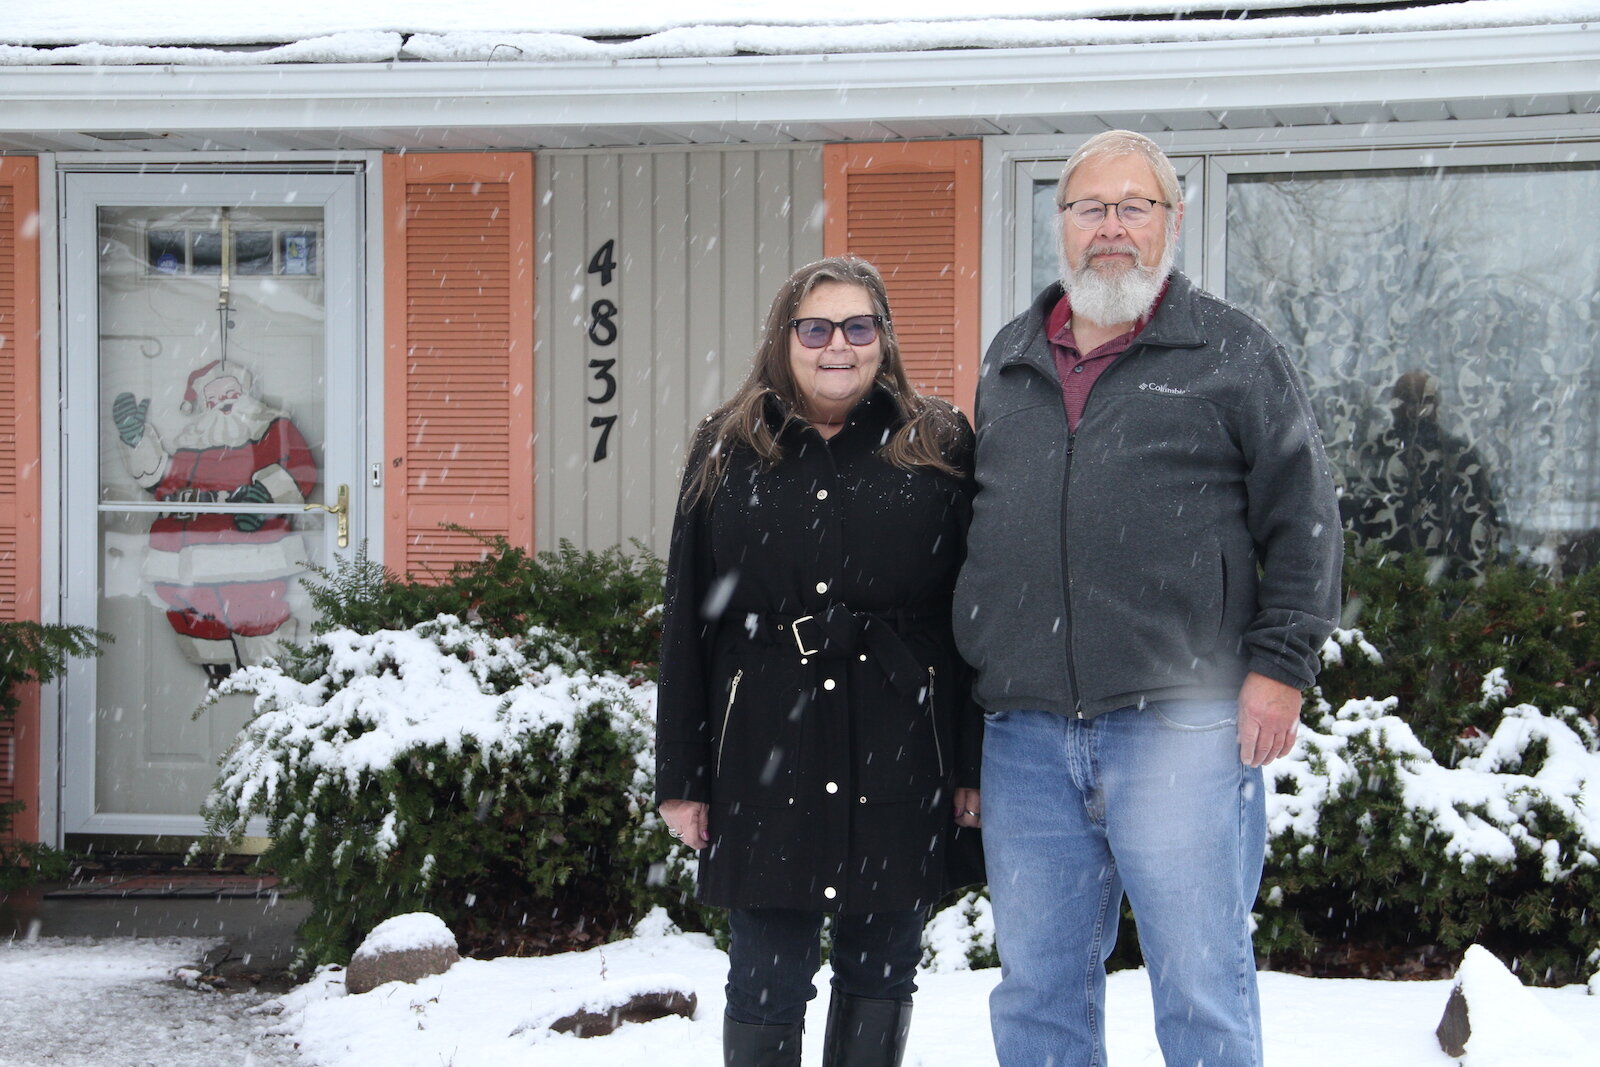 Joanne and Scott Randolph stand outside their Fort Wayne home, which once belonged to actress from The Office, Jenna Fischer.